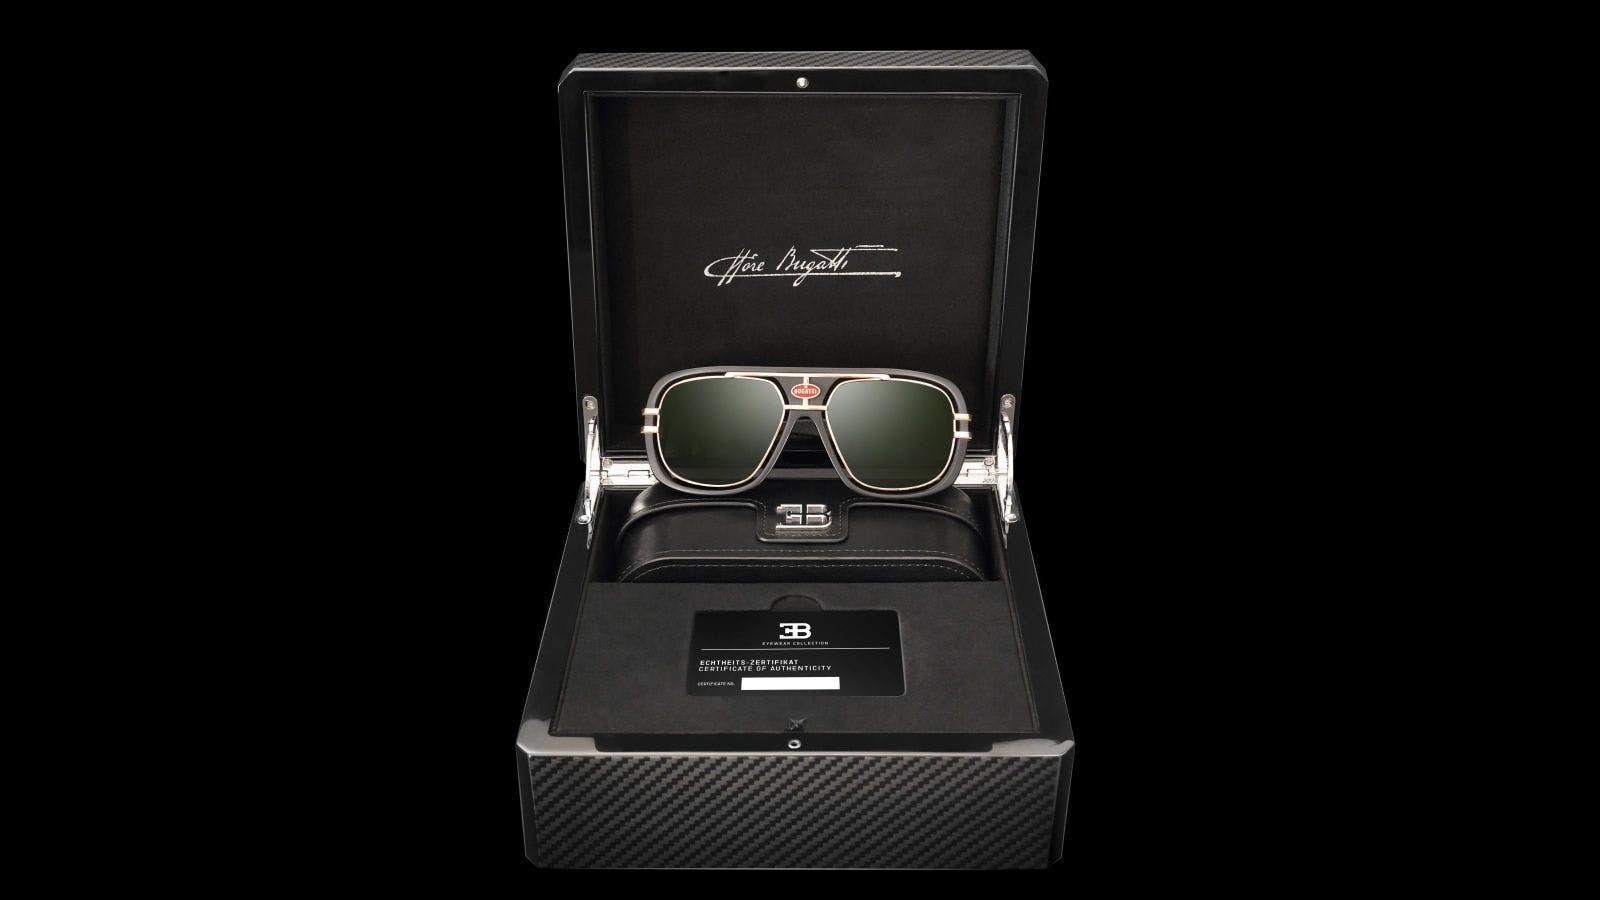 Bugatti Eyewear Collection One Hyperluxury Package, Carbon Fiber Lacquered Box with Black Suede Interior and Silver Hardware.